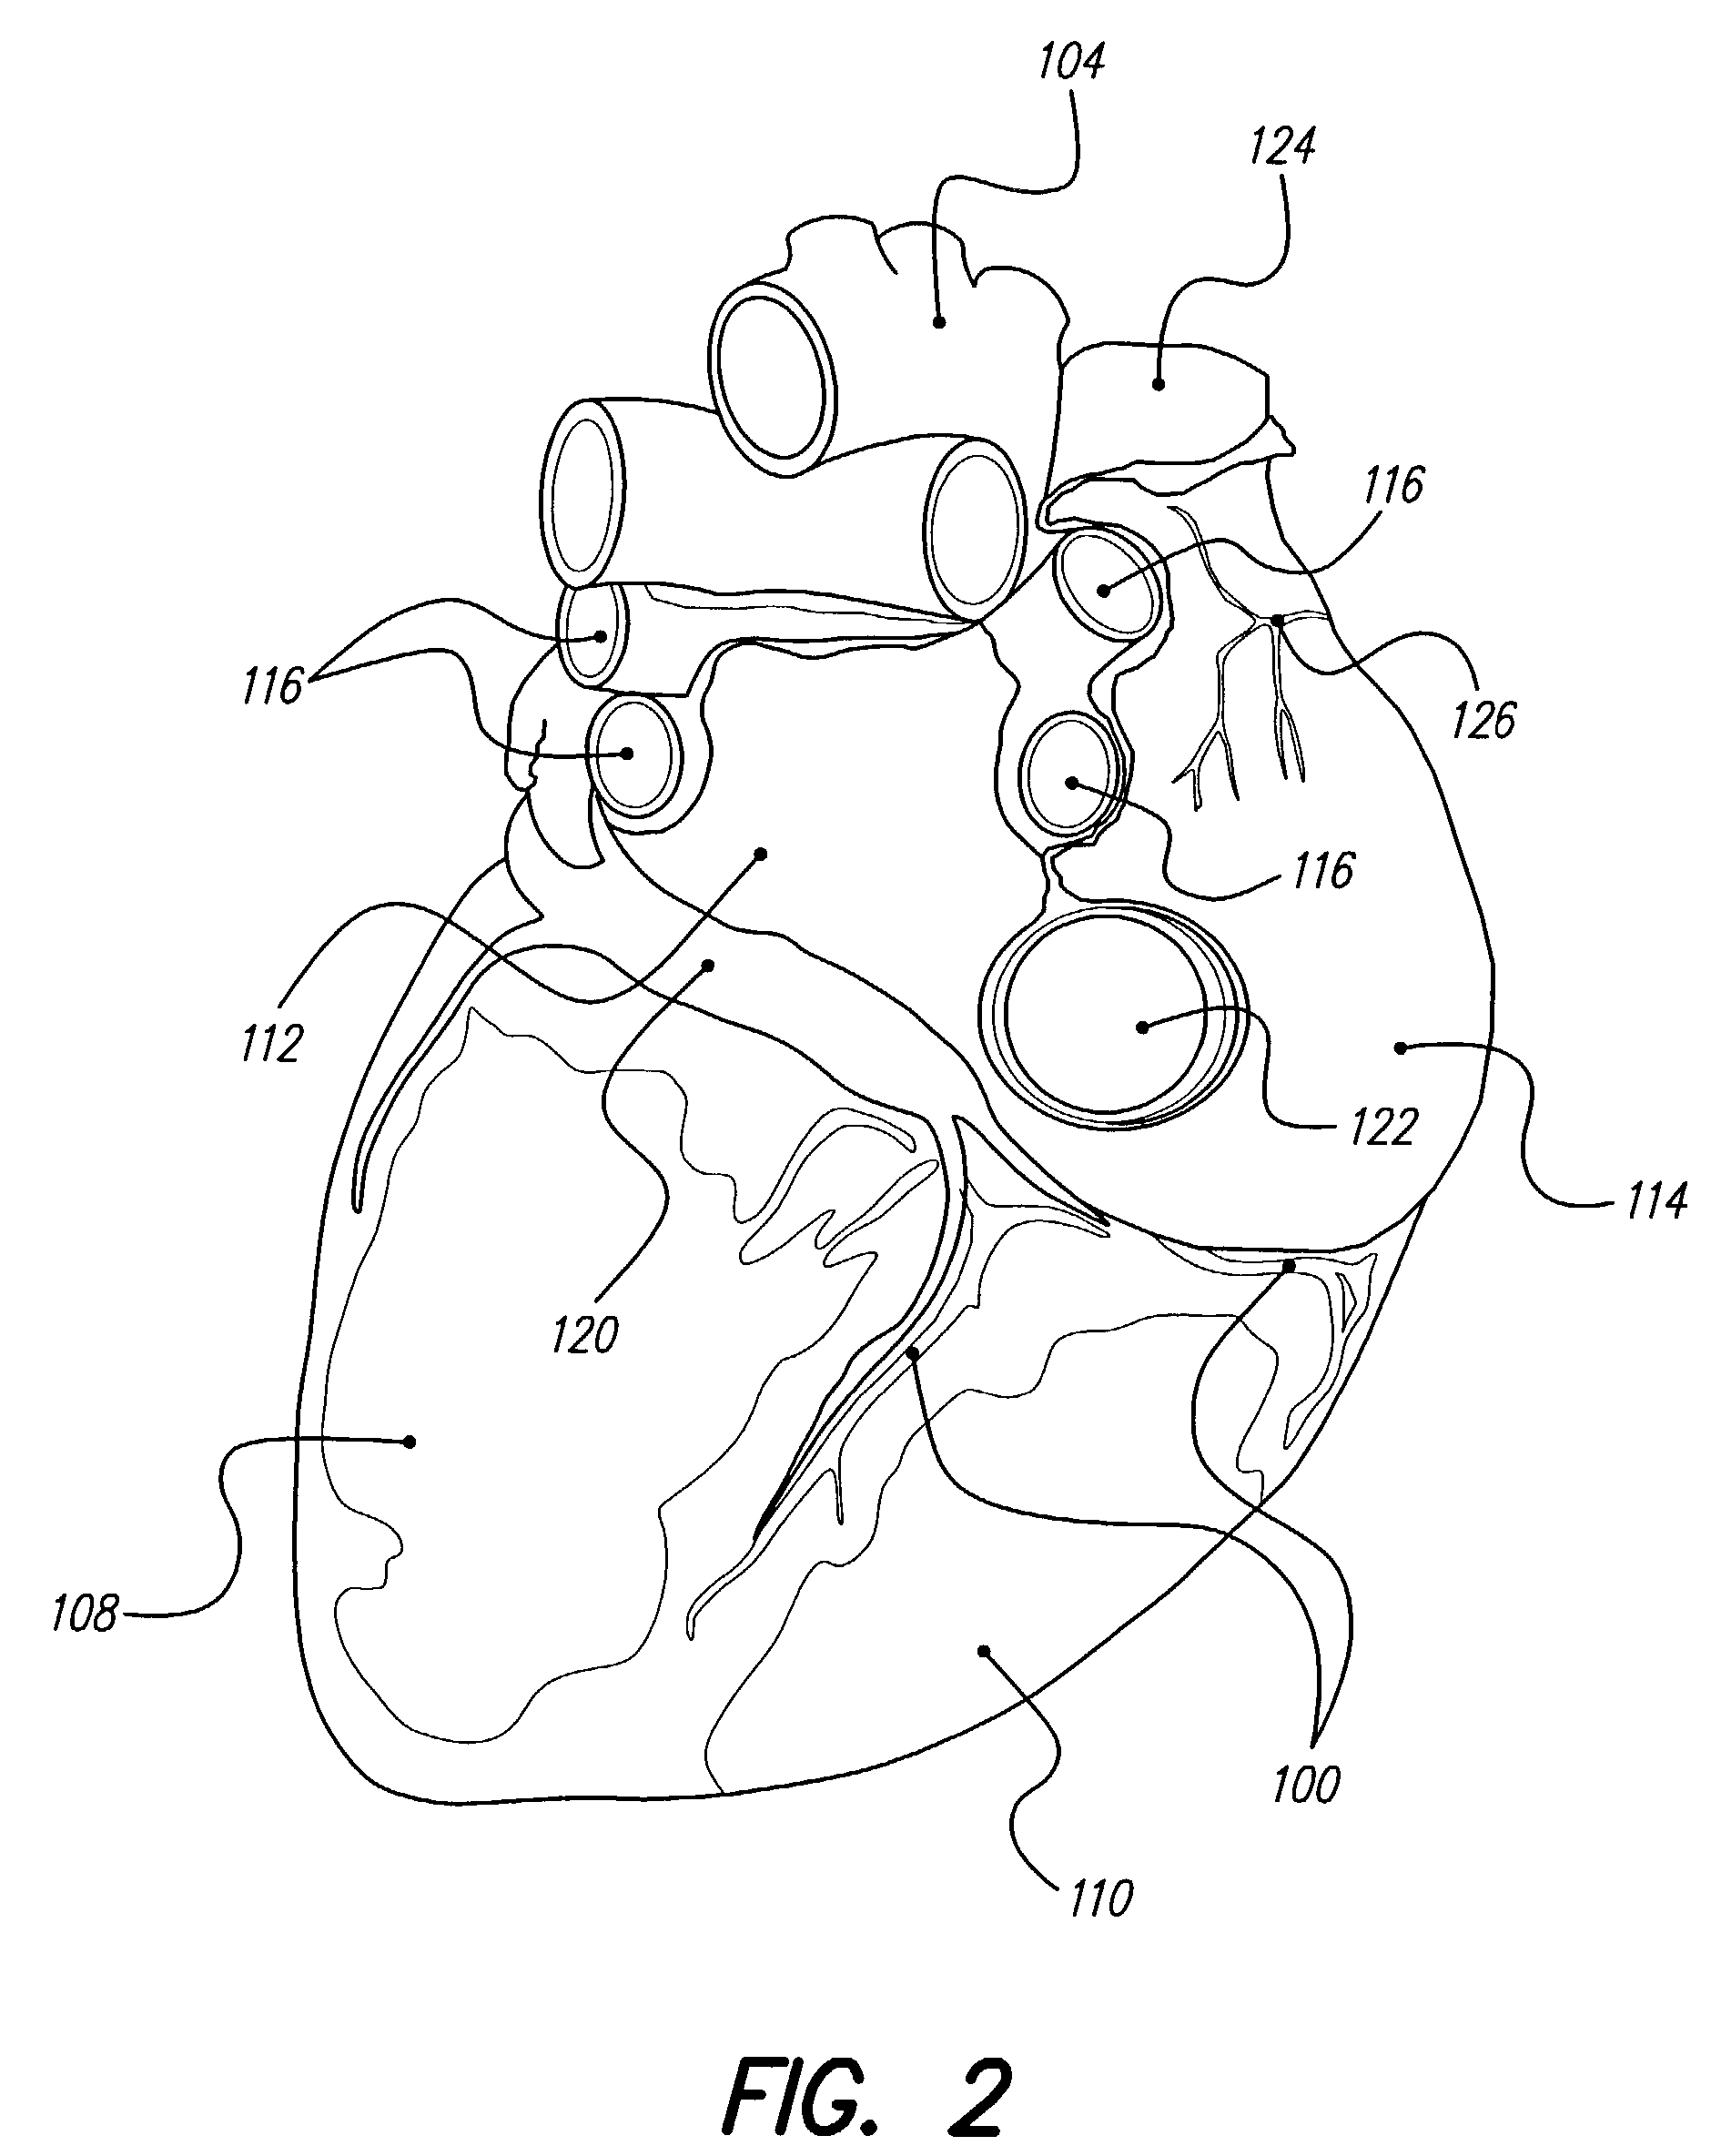 Systems and methods for treatment of coronary artery disease